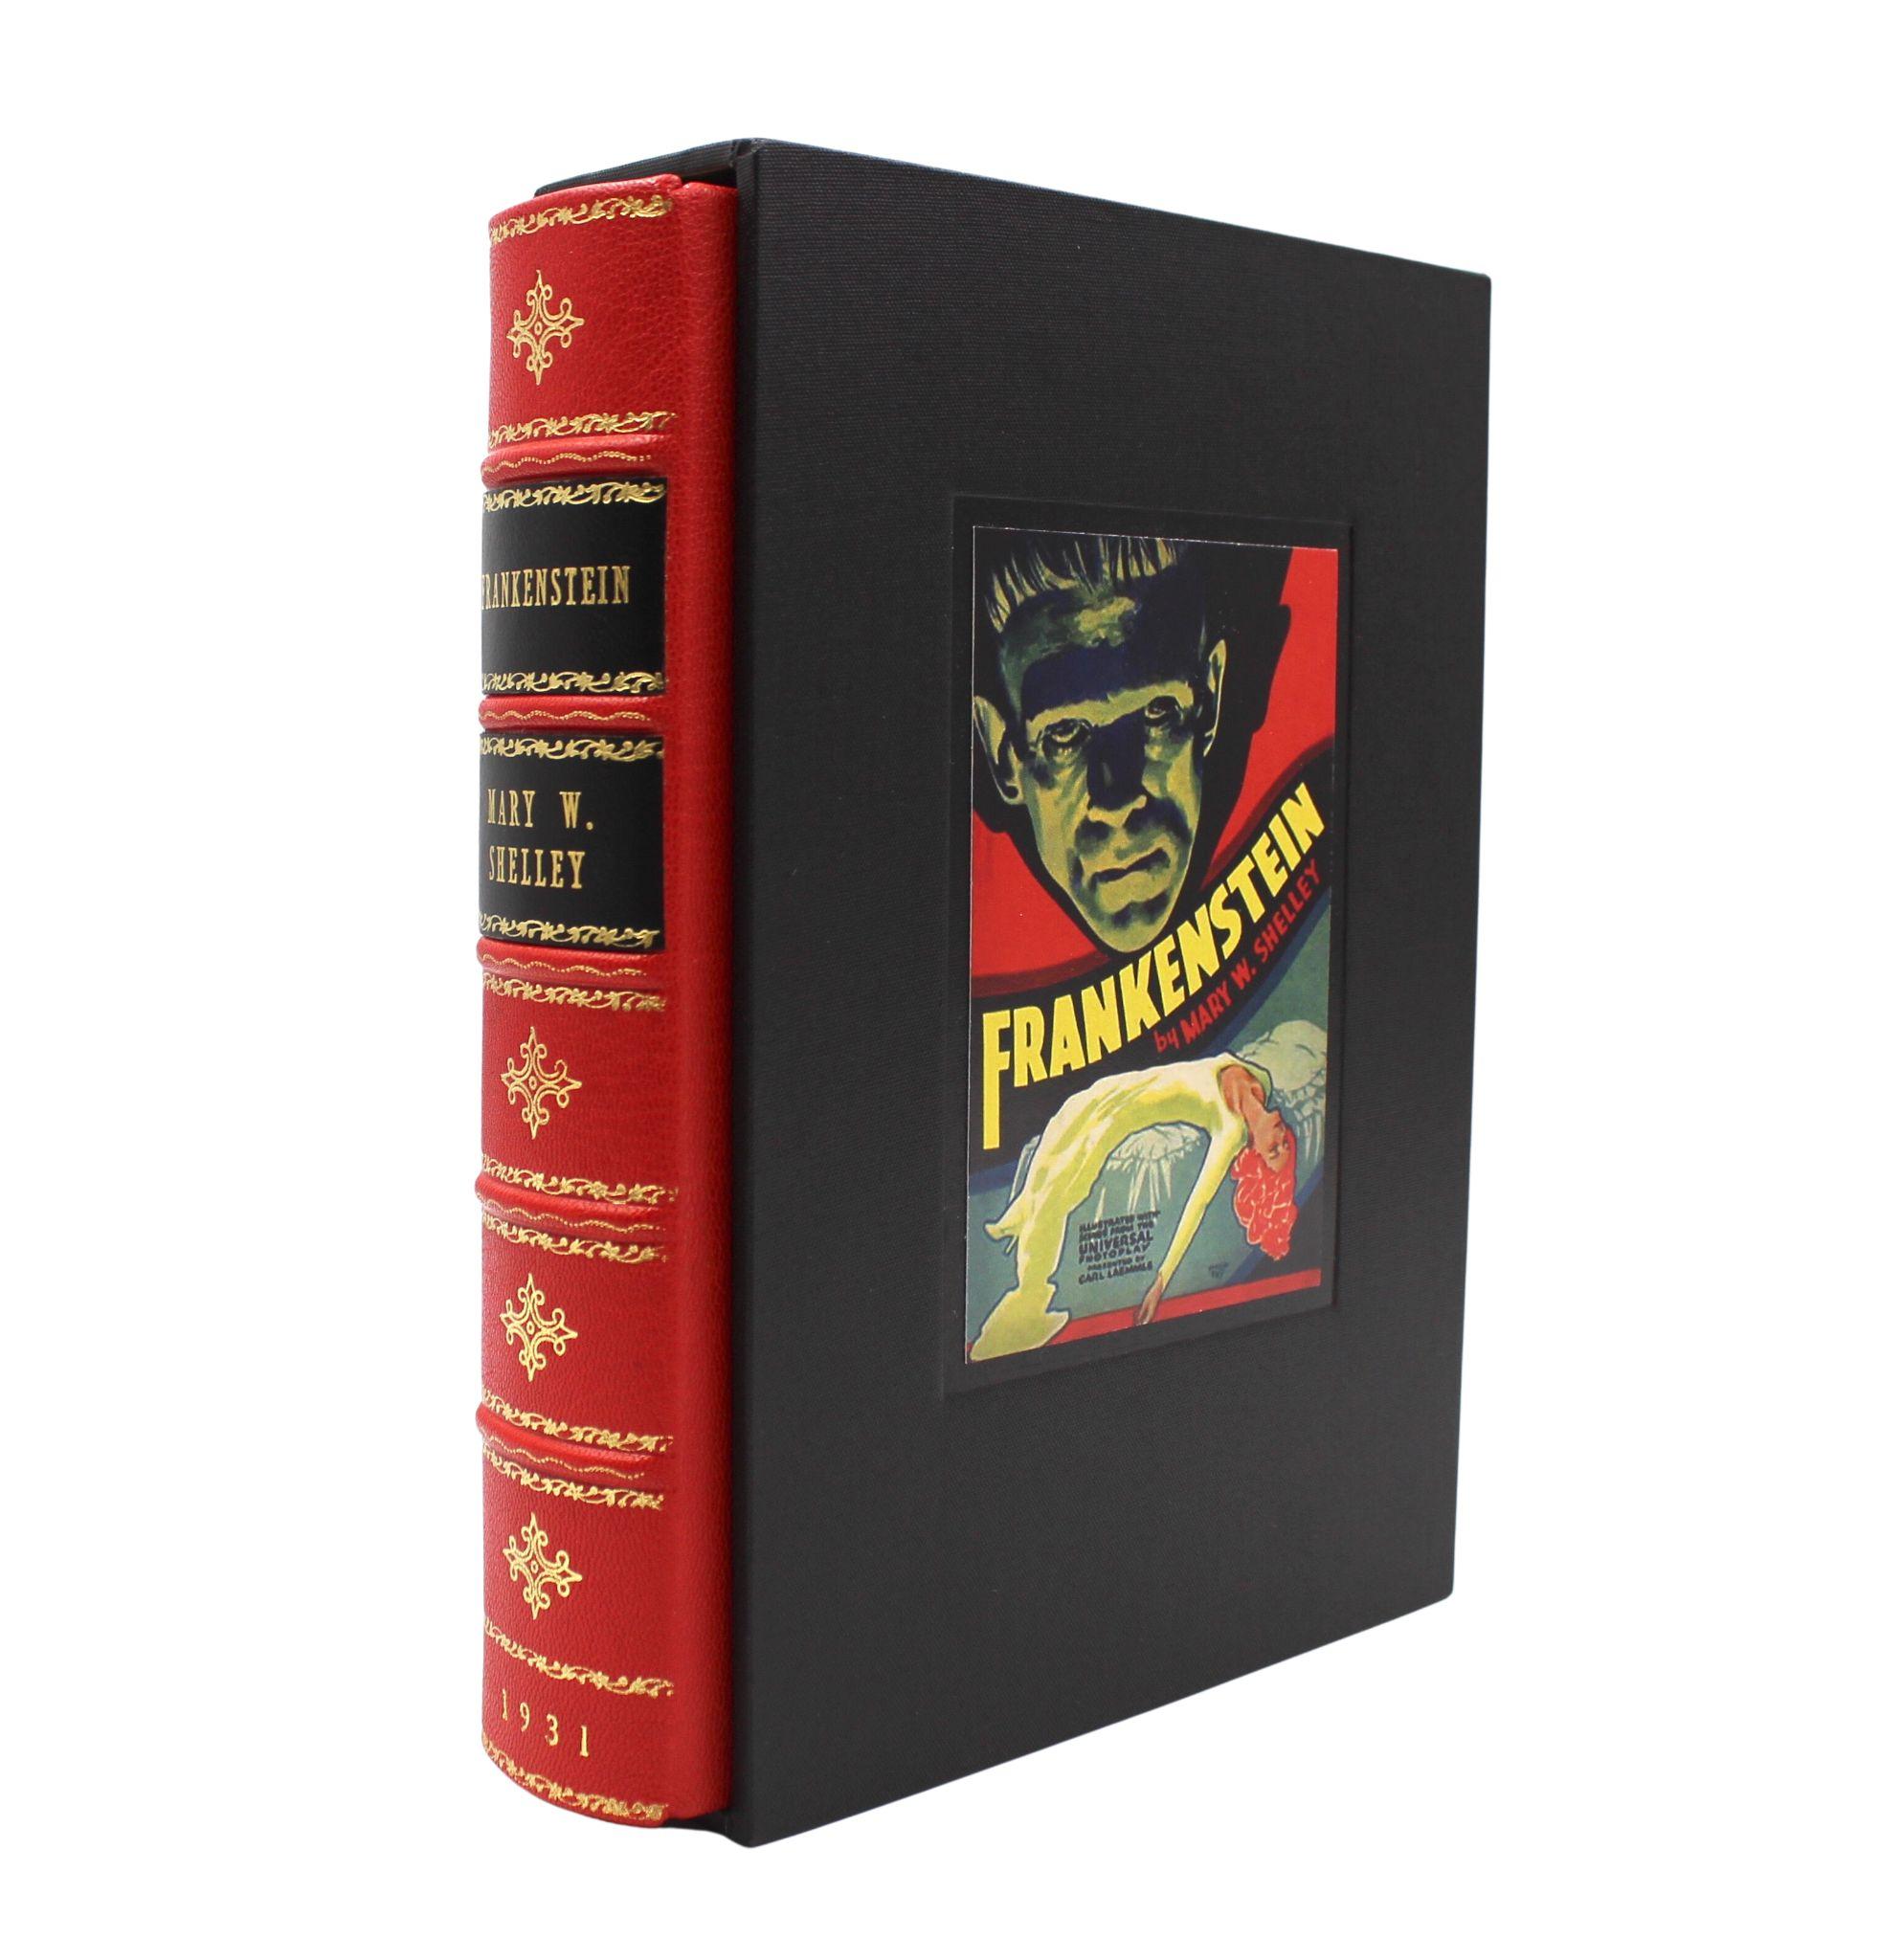 Shelley, Mary.  Frankenstein; or The Modern Prometheus. New York: Grosset & Dunlap, [1931]. 8vo. Rebound in red 1/.4 leather and black cloth boards, with raised bands, gilt stamps, and gilt titles to spine. New matching archival slipcase.

Presented